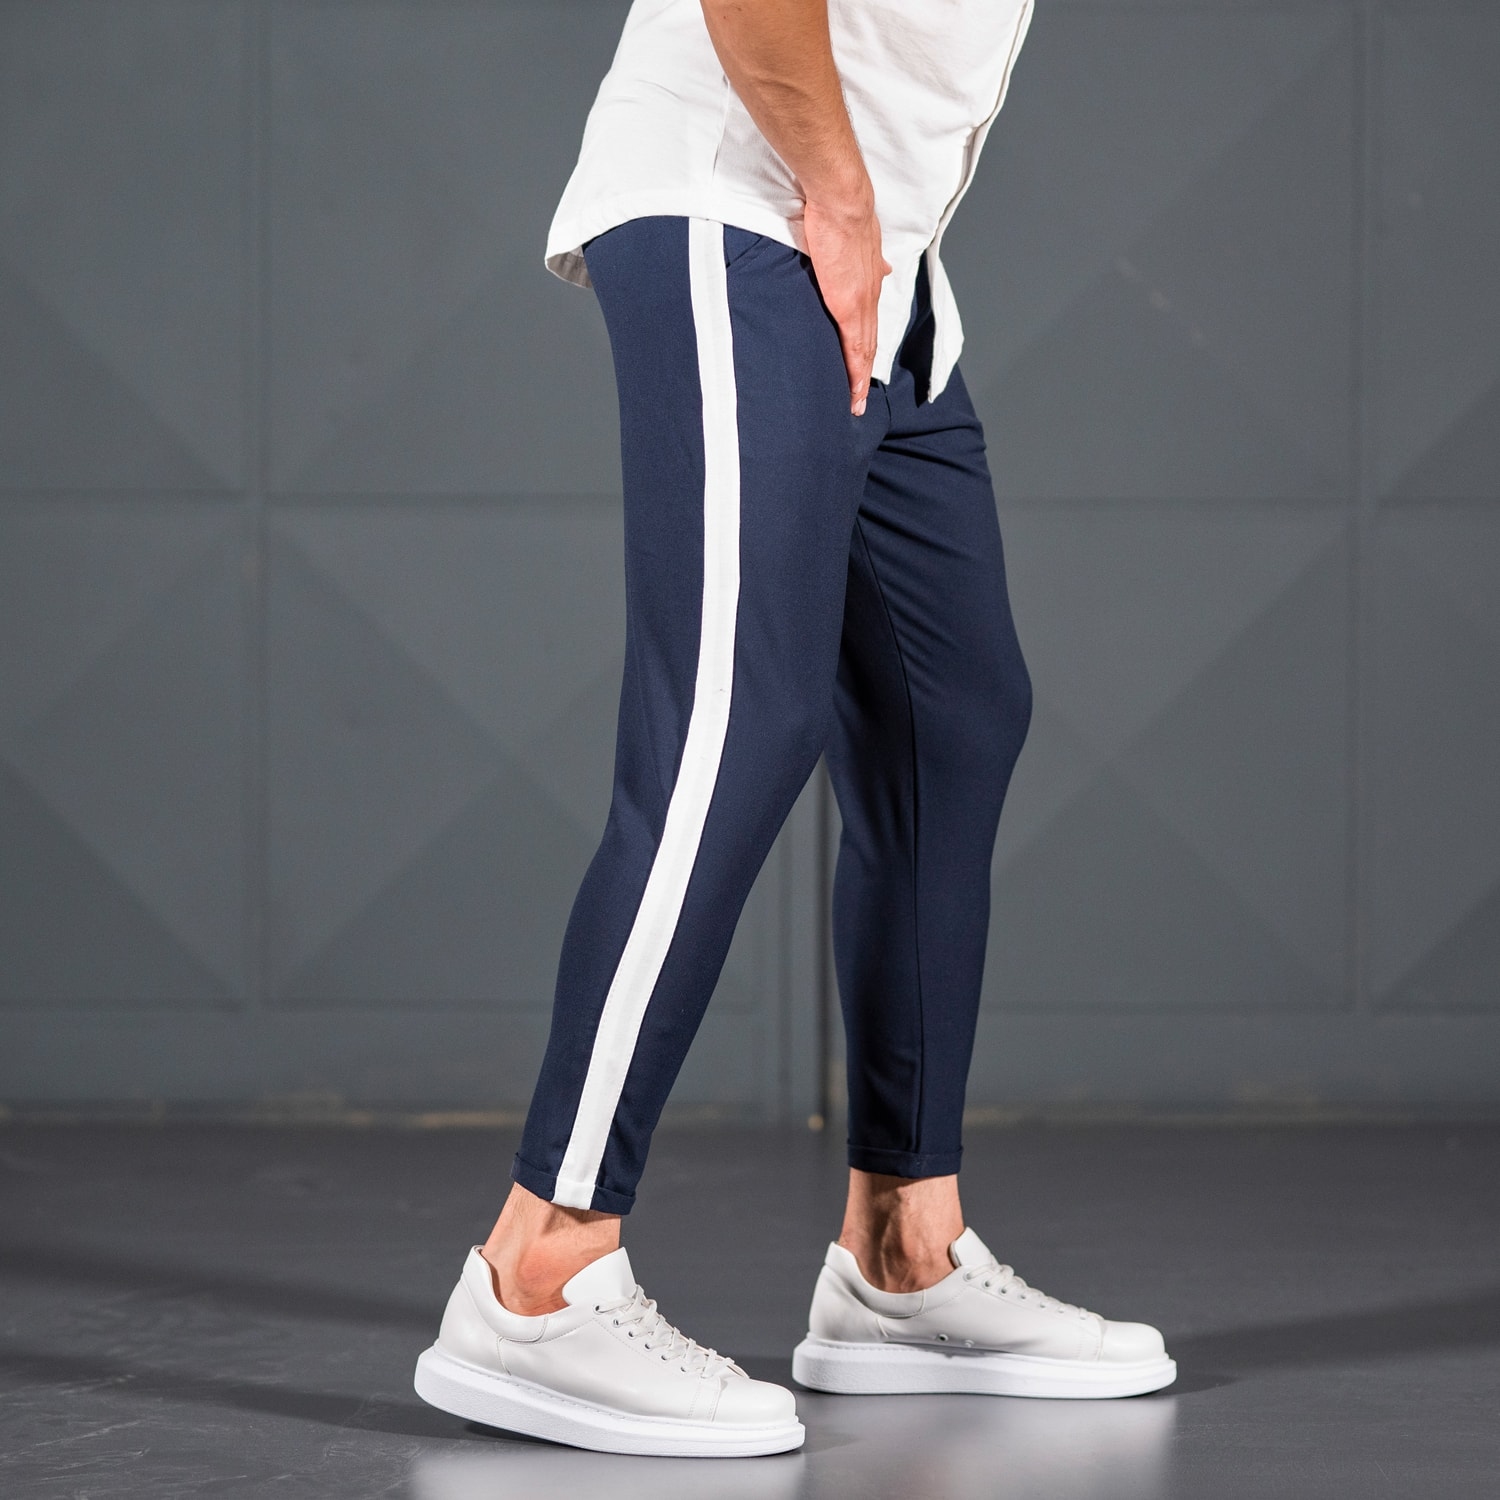 blue and white striped pants mens